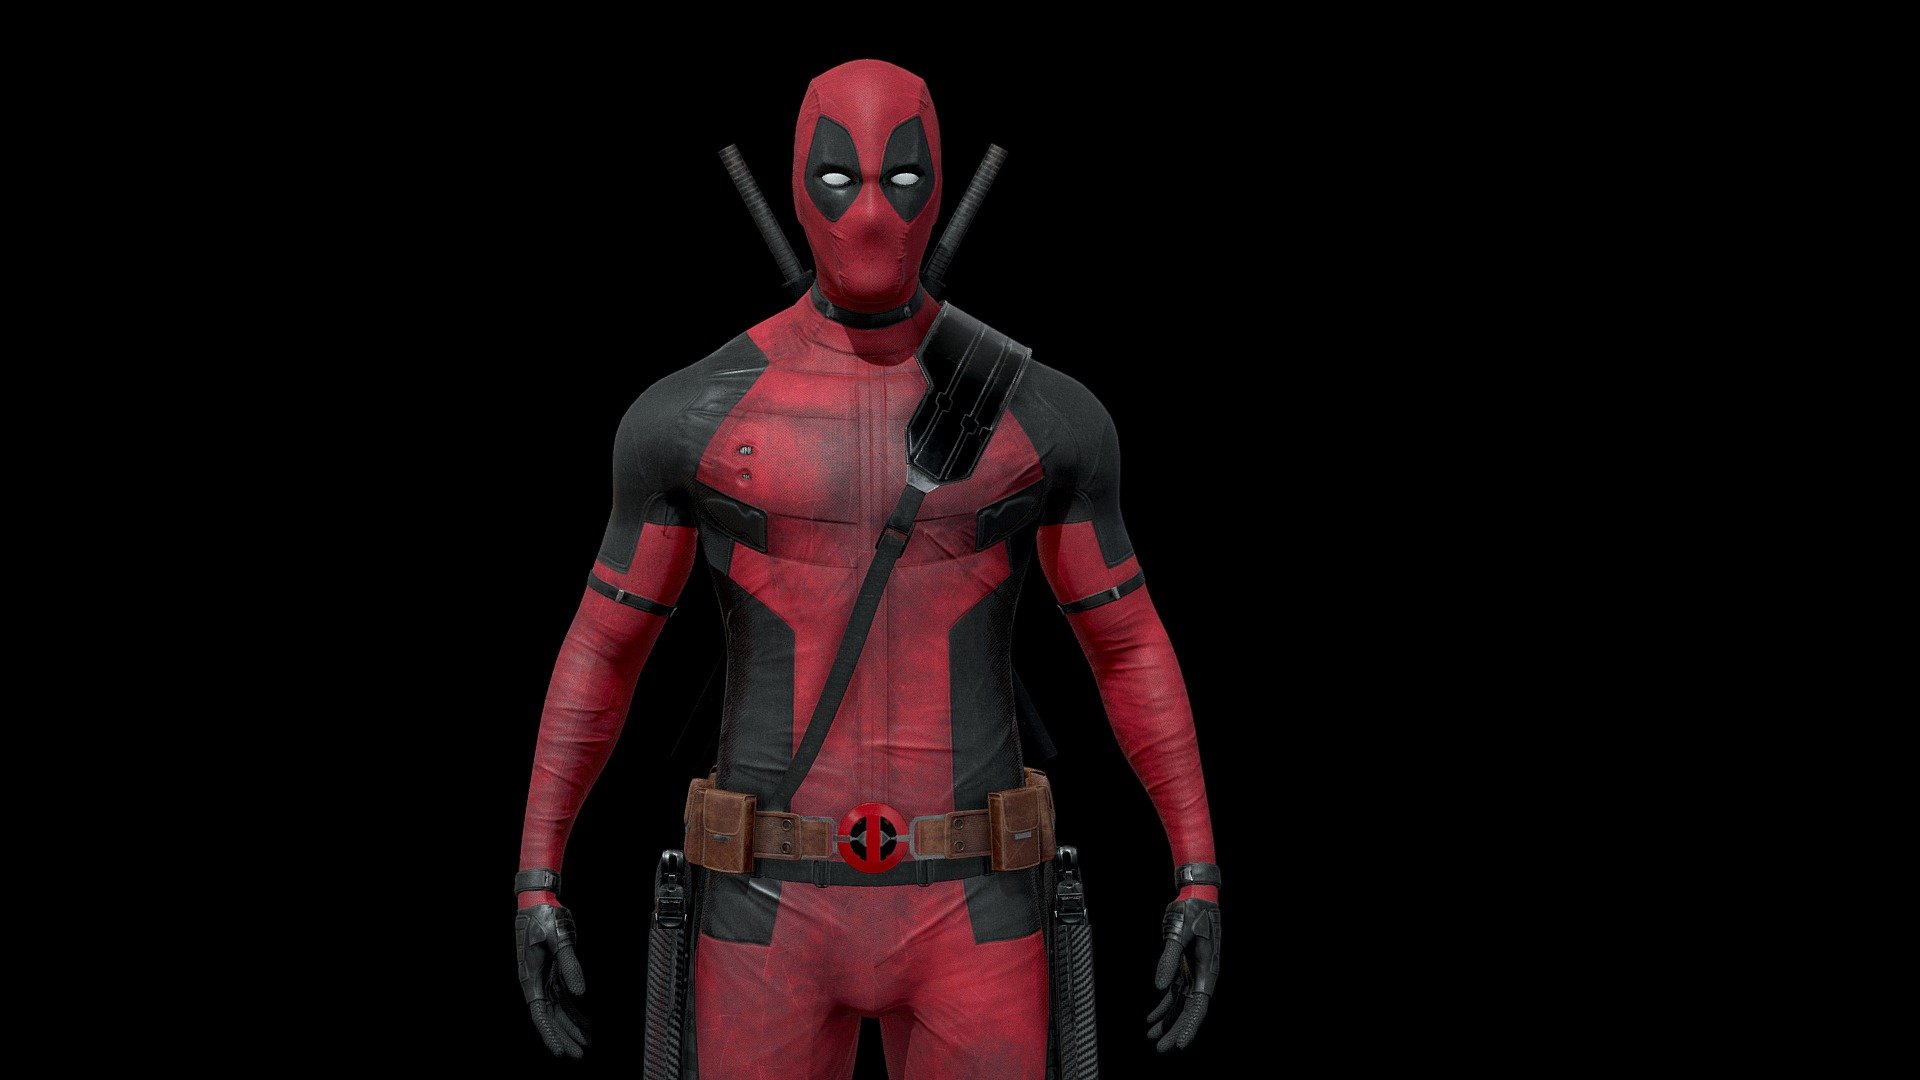 Game Ready Model.

Product name:Deadpool Realistic

Ancient Greek Warrior, wearing not so practical armor for showing his abs!

Full Preview Gallery: https://www.artstation.com/artwork/Bmm5m4


Low poly, game ready, Non-rigged, PBR textures. UE4 supported.
Poly Counts: 42,000
Total tris counts: 82,000
Model Height: 188cm  
.blend file. Blender 3.2+
PBR textures (Metallic-Roughness) 4096x4096 and

You Can also Find 8192X8192 Resolution Attached.

After purchase, please download the product archive also

Note: This model is not Rigged 3d model